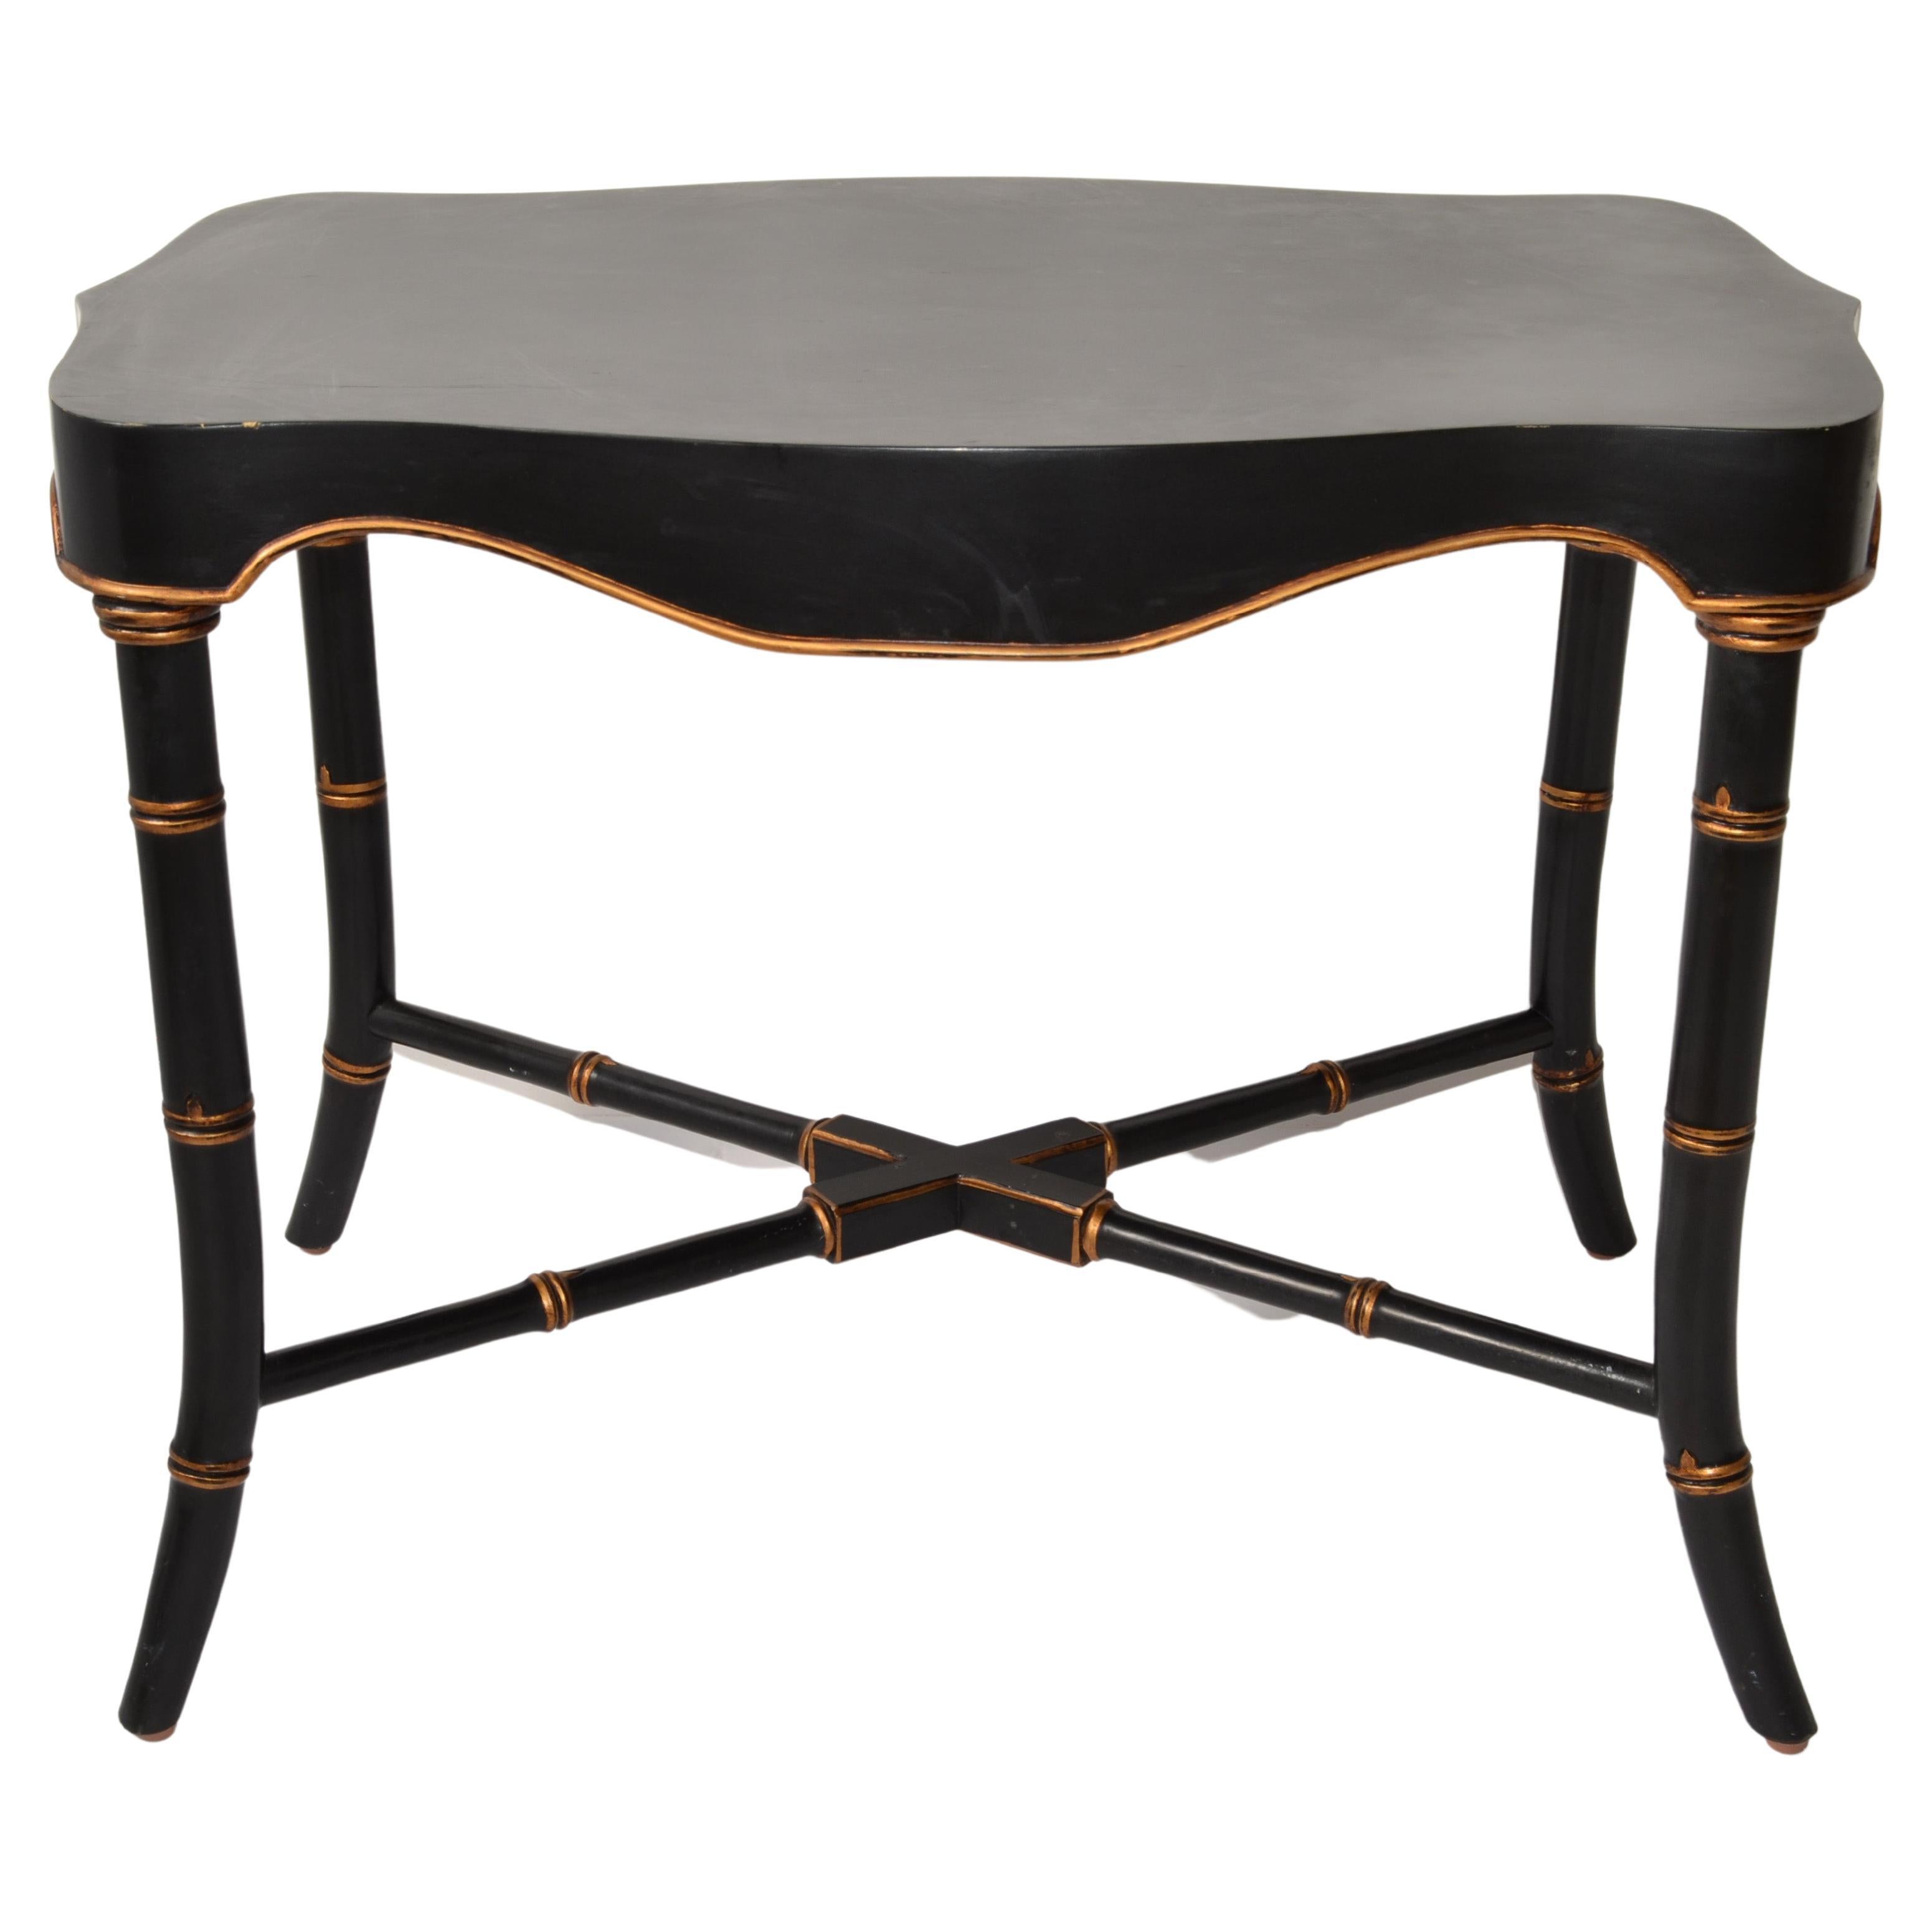 Victorian Mid-20th Century Black Gold Finish Accent Table Faux Bamboo Cross Base For Sale